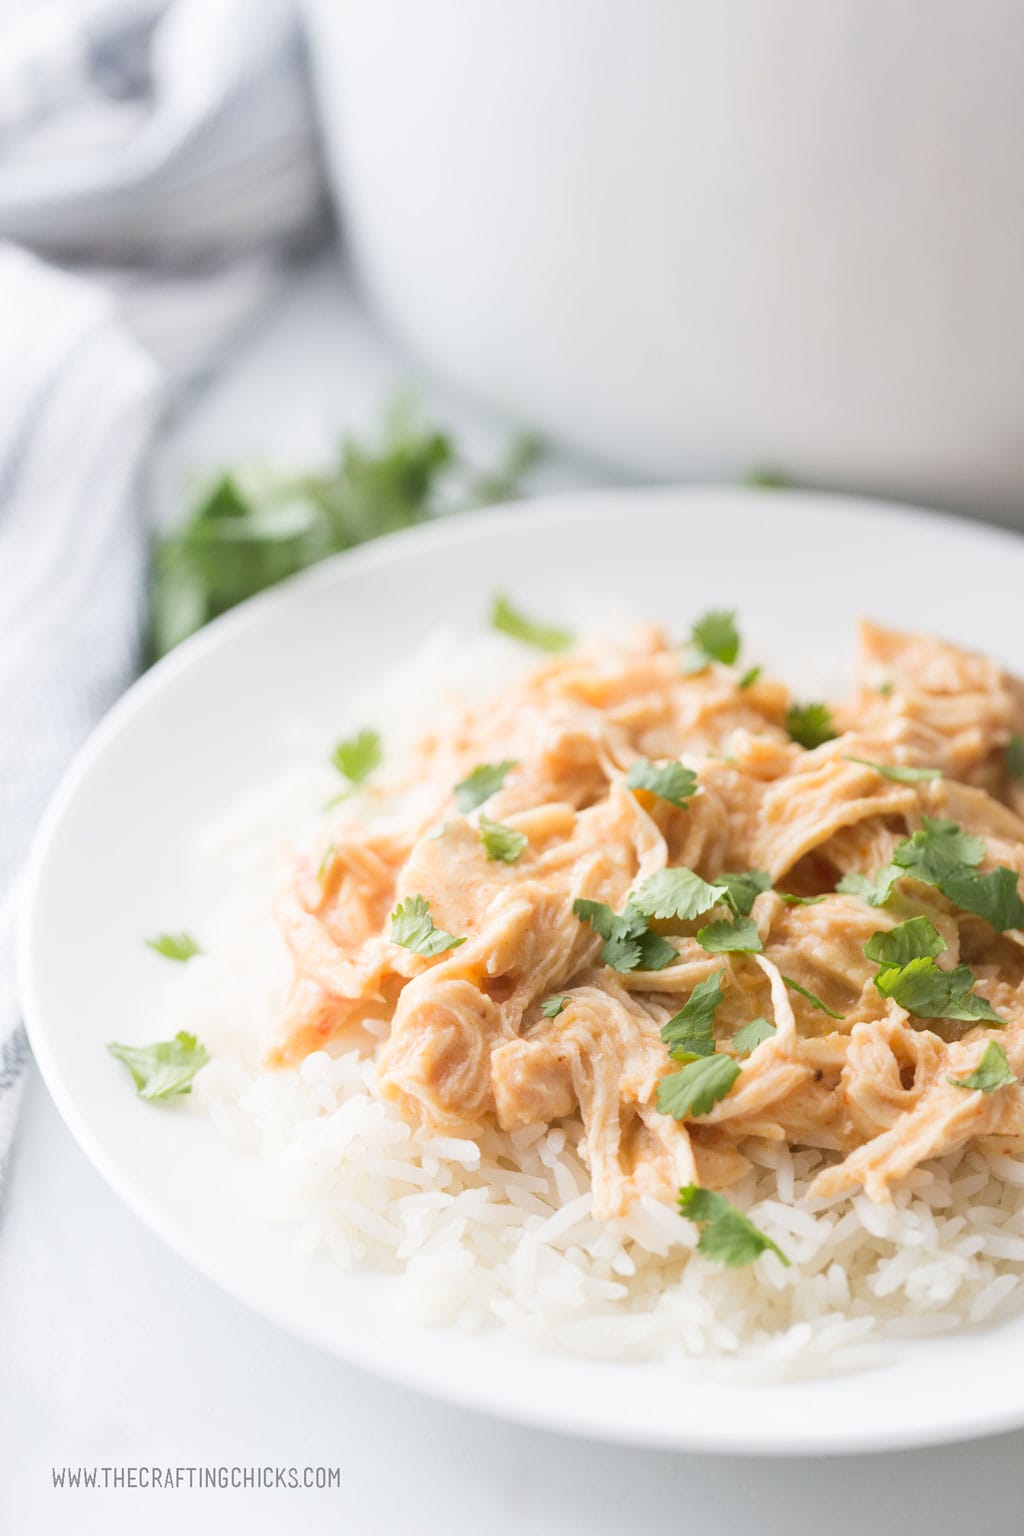 Crockpot Fiesta ranch Chicken served over rice with some cilantro sprinkled on top.